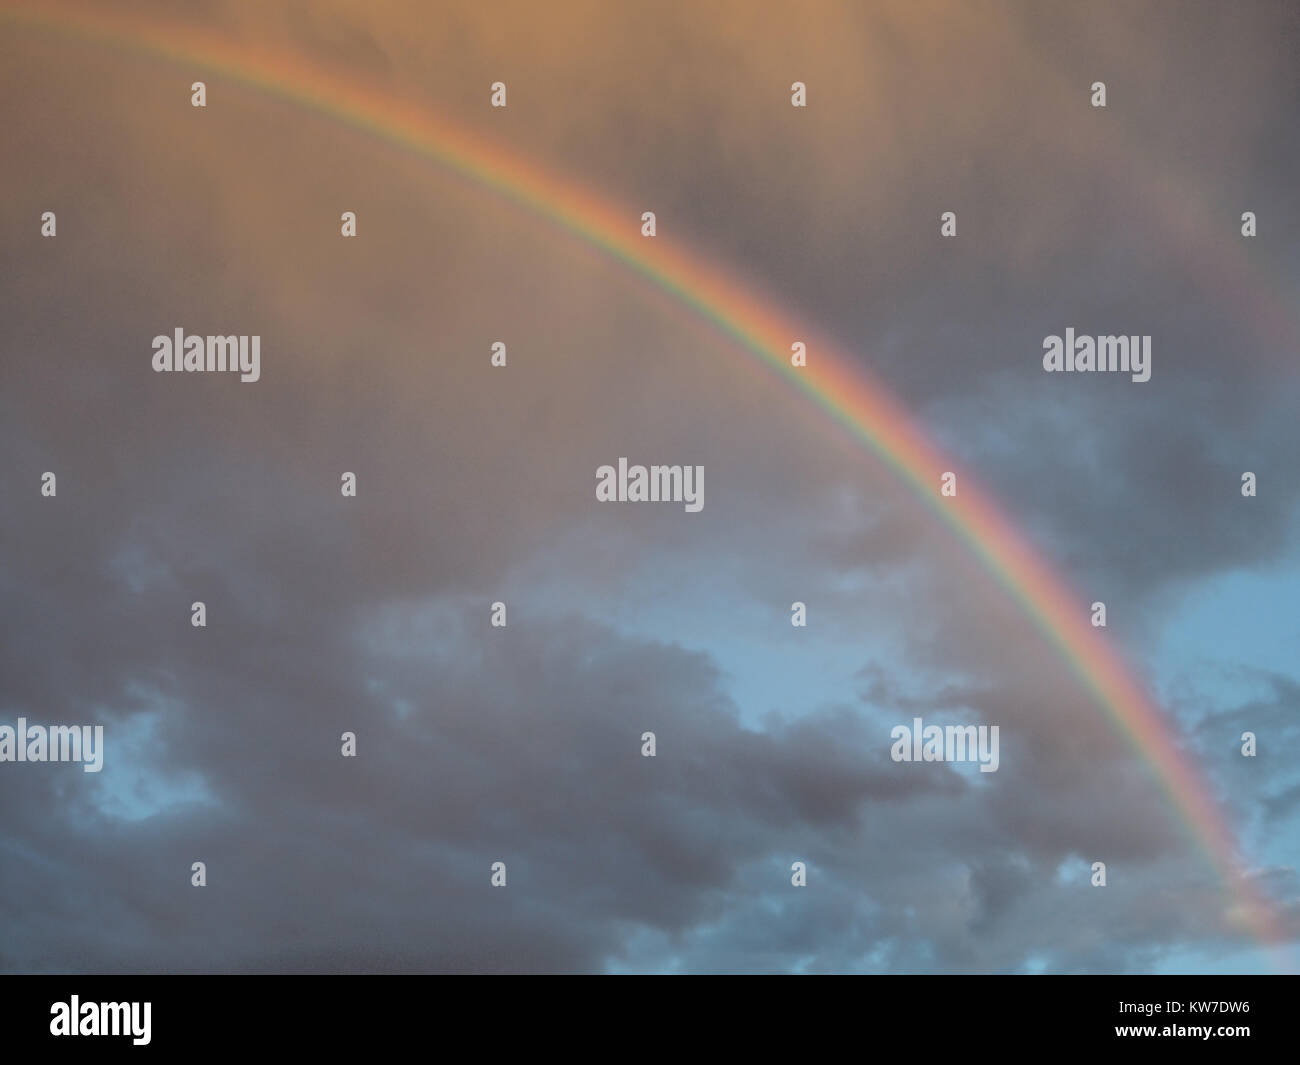 Large colored rainbow in a blue sky amidst gray clouds. Stock Photo